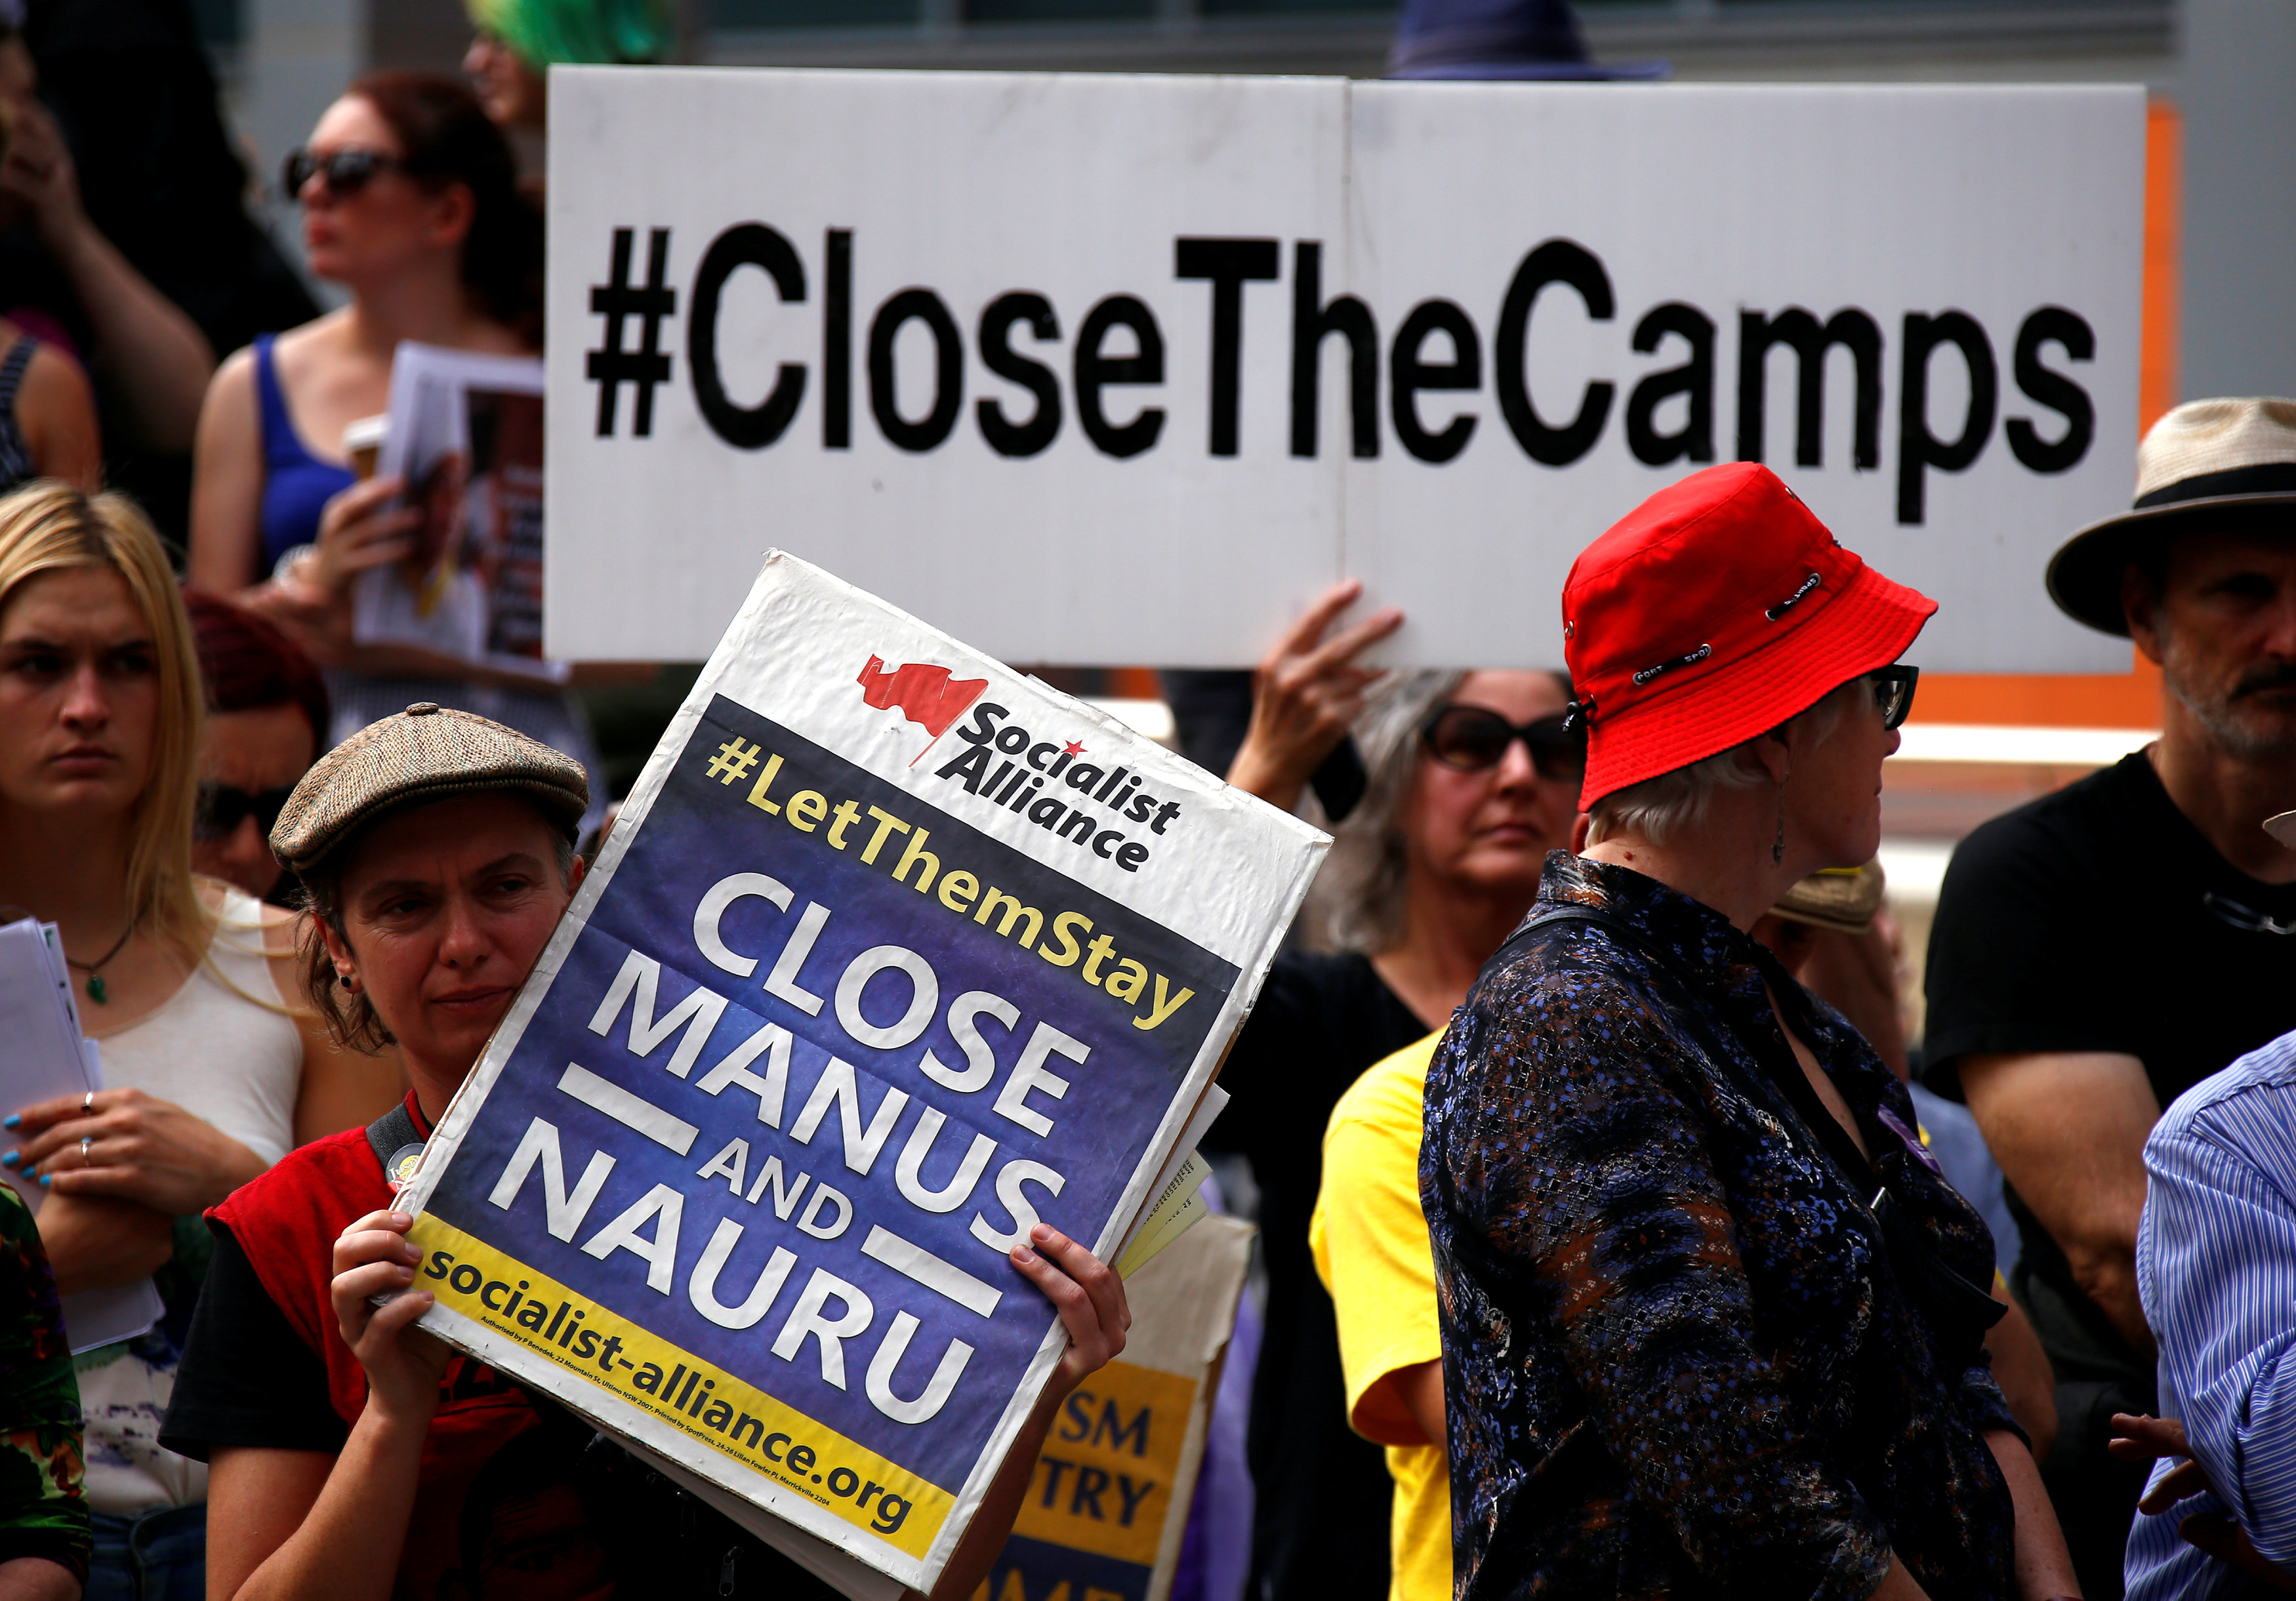 Cambodia revives Australia refugee deal with planned Nauru visit